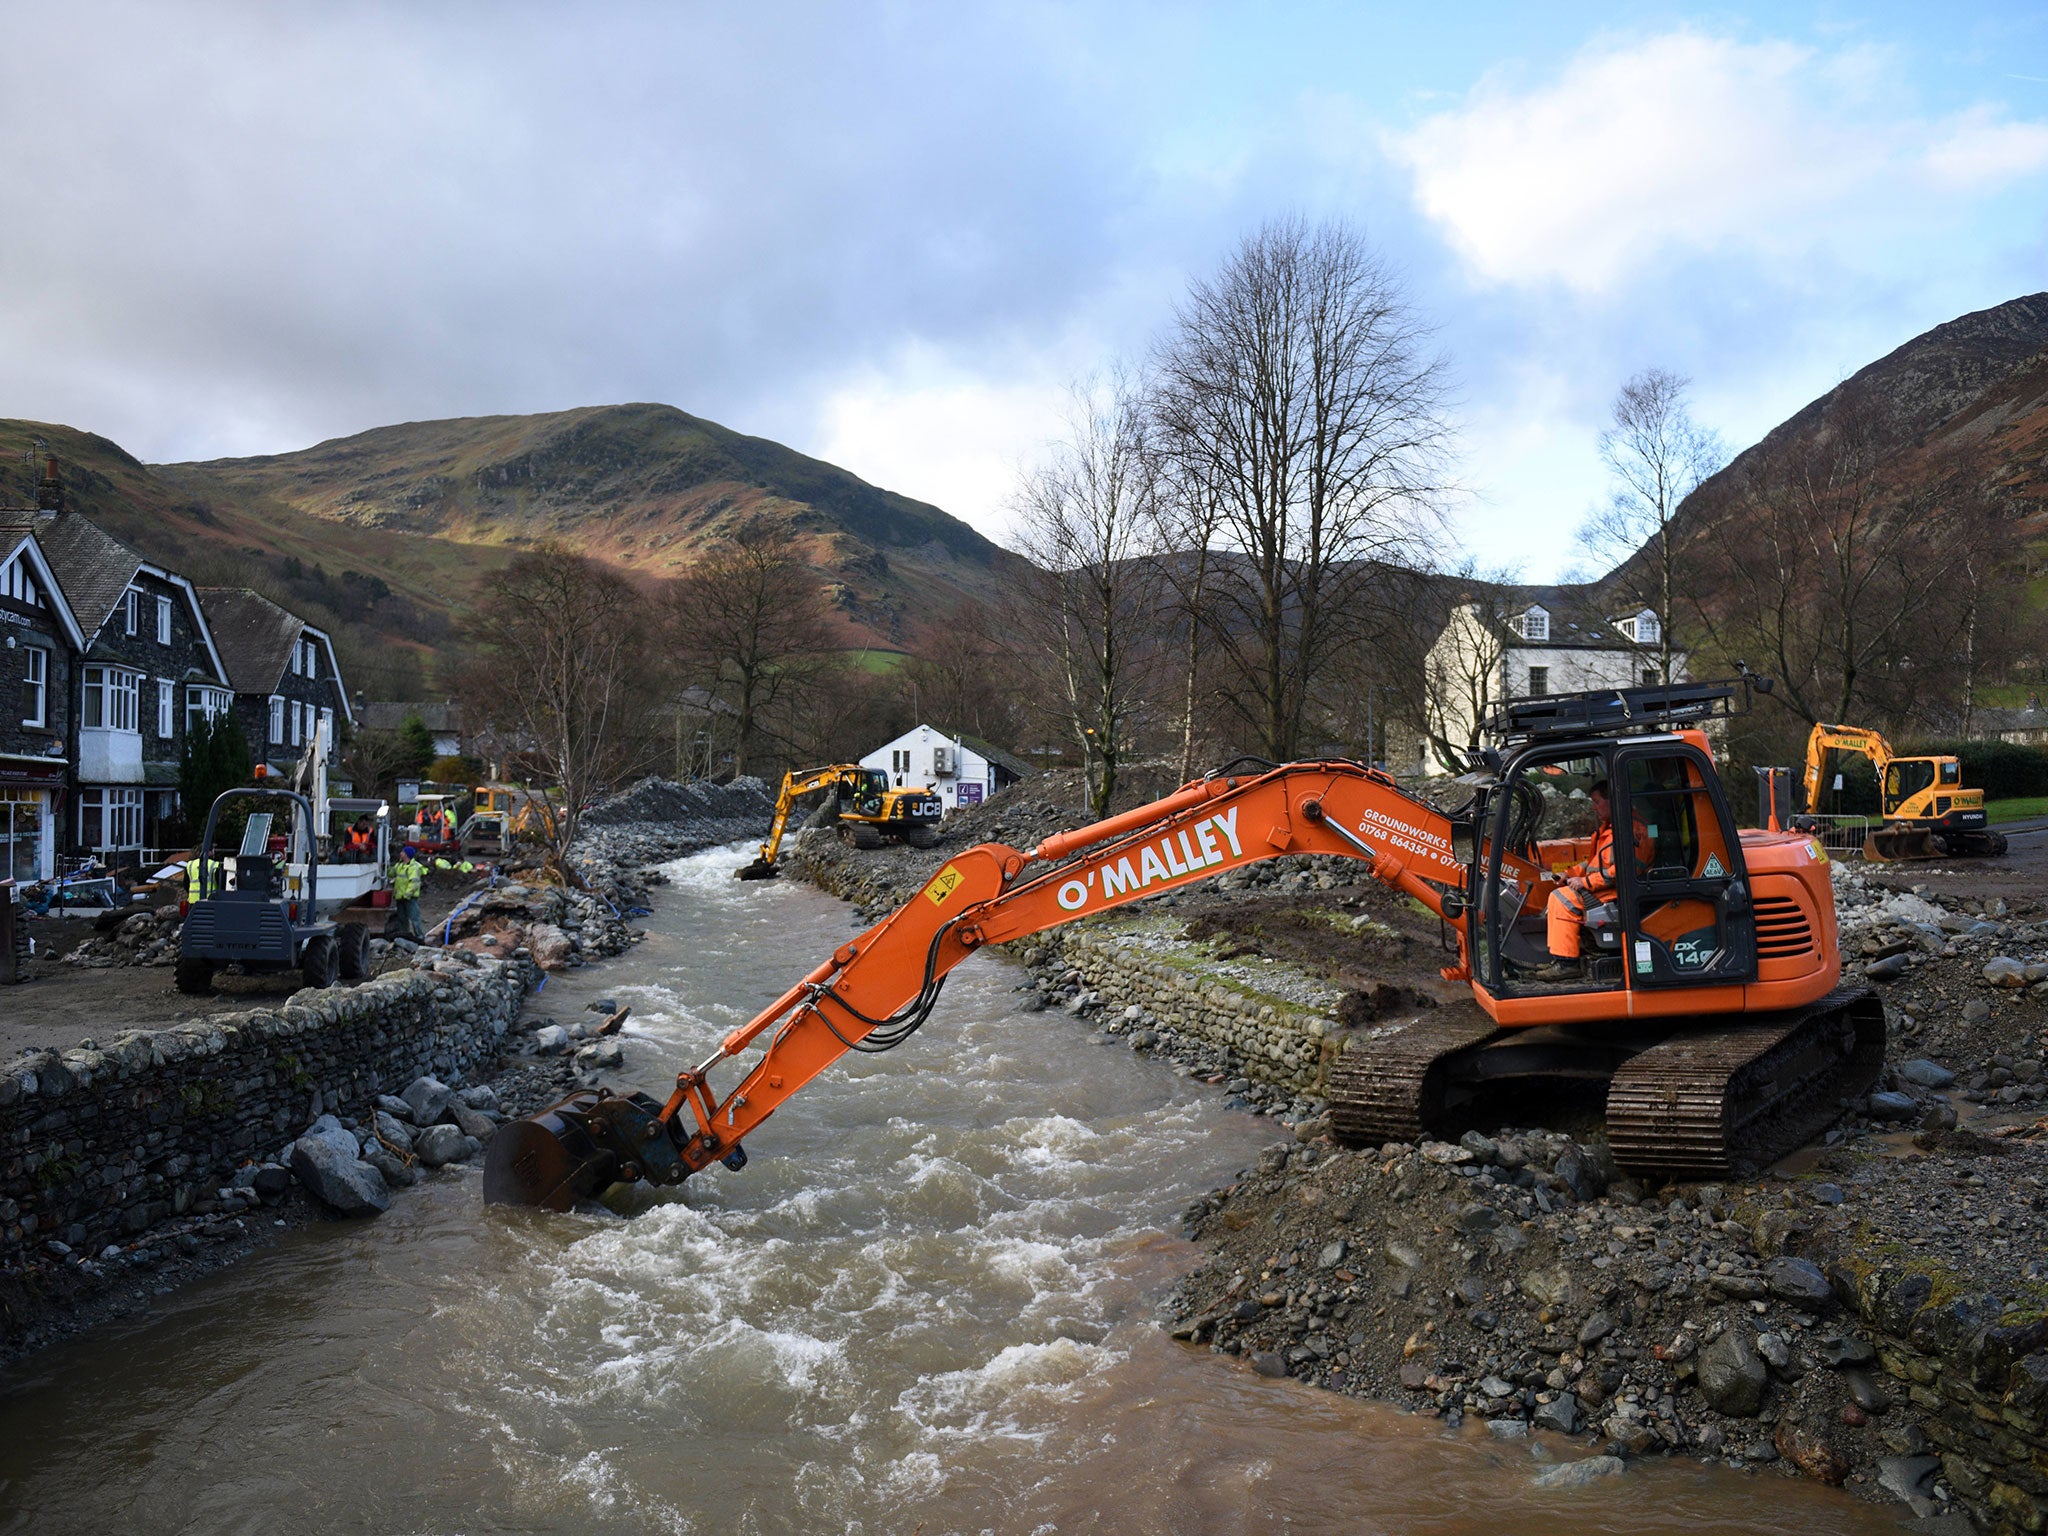 A digger is used to improve drainage in Glenridding in the Lake District